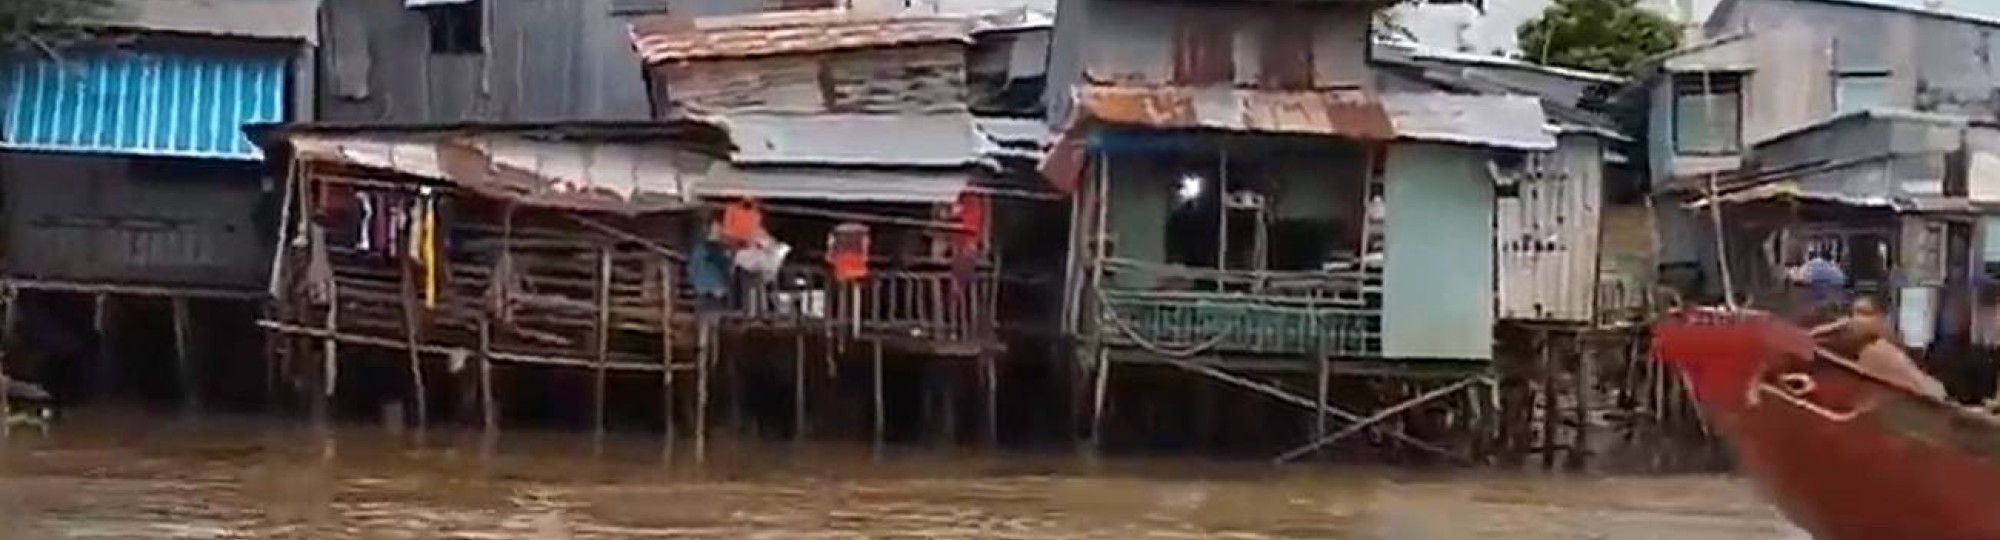 336614 still video recycled plastic for flood resilience mekong delta srm